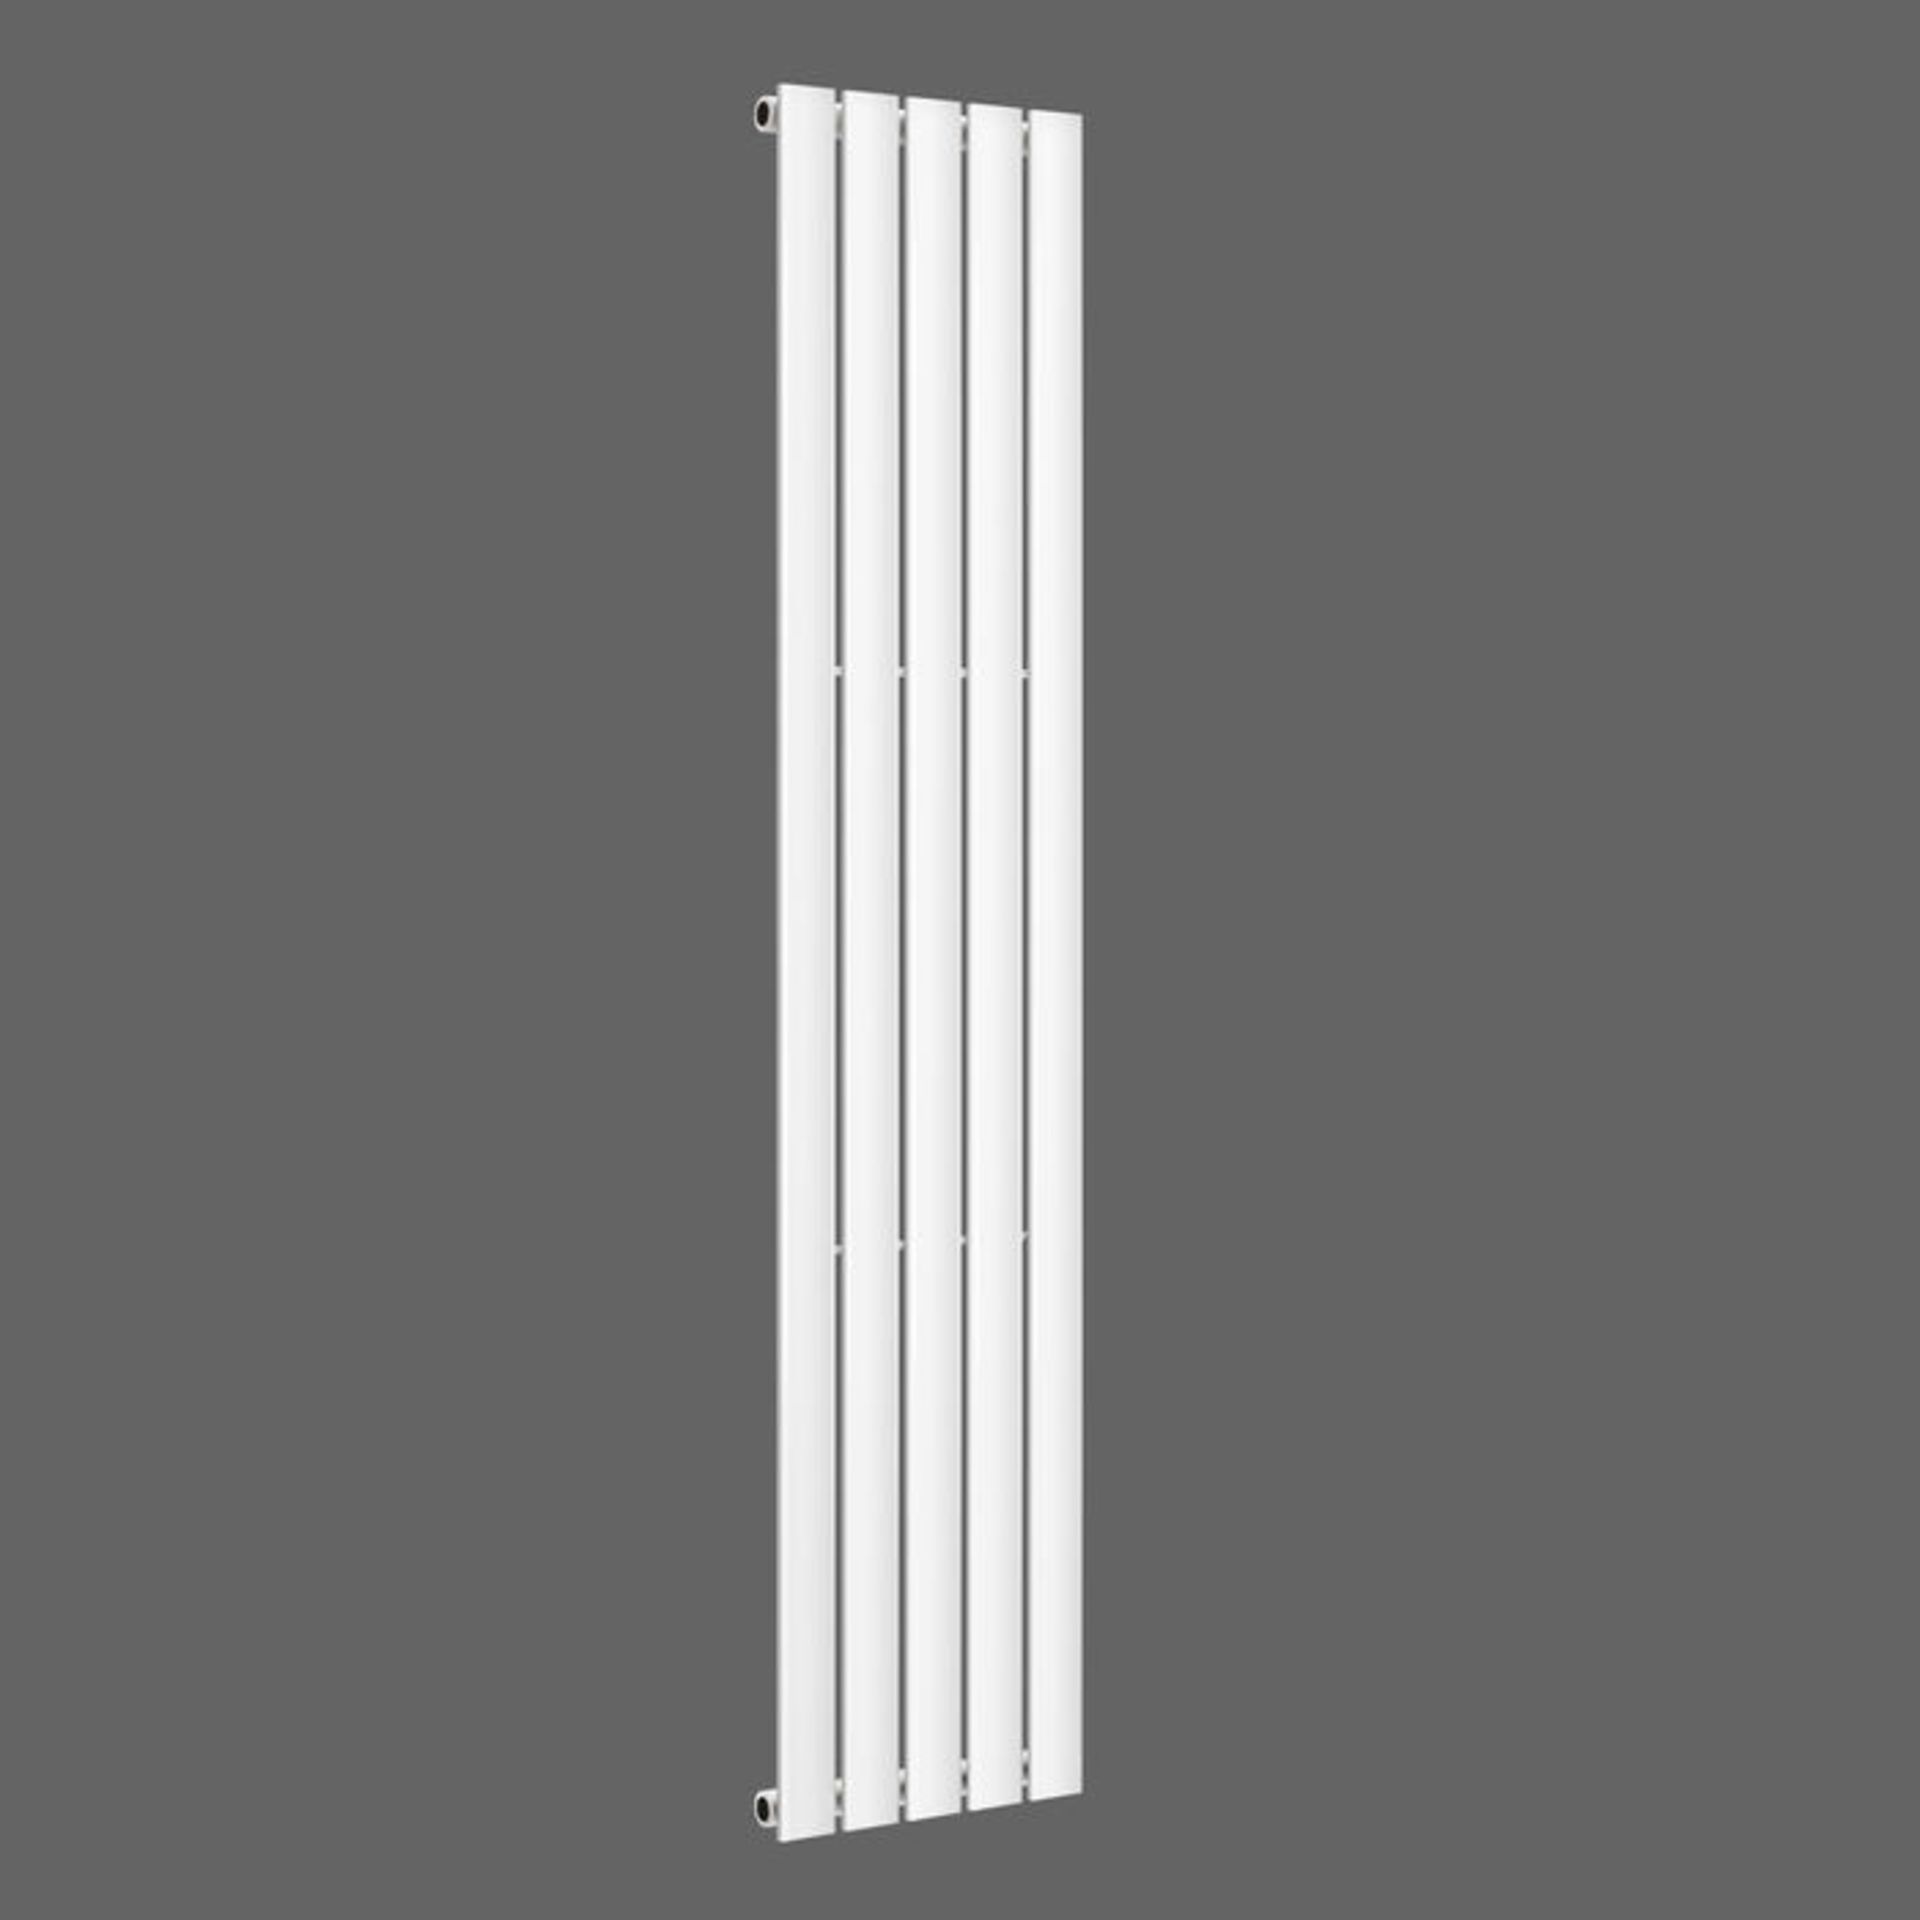 (S154) 1800x376mm Gloss White Single Flat Panel Vertical Radiator RRP £263.99 Made with low carbon - Image 3 of 3